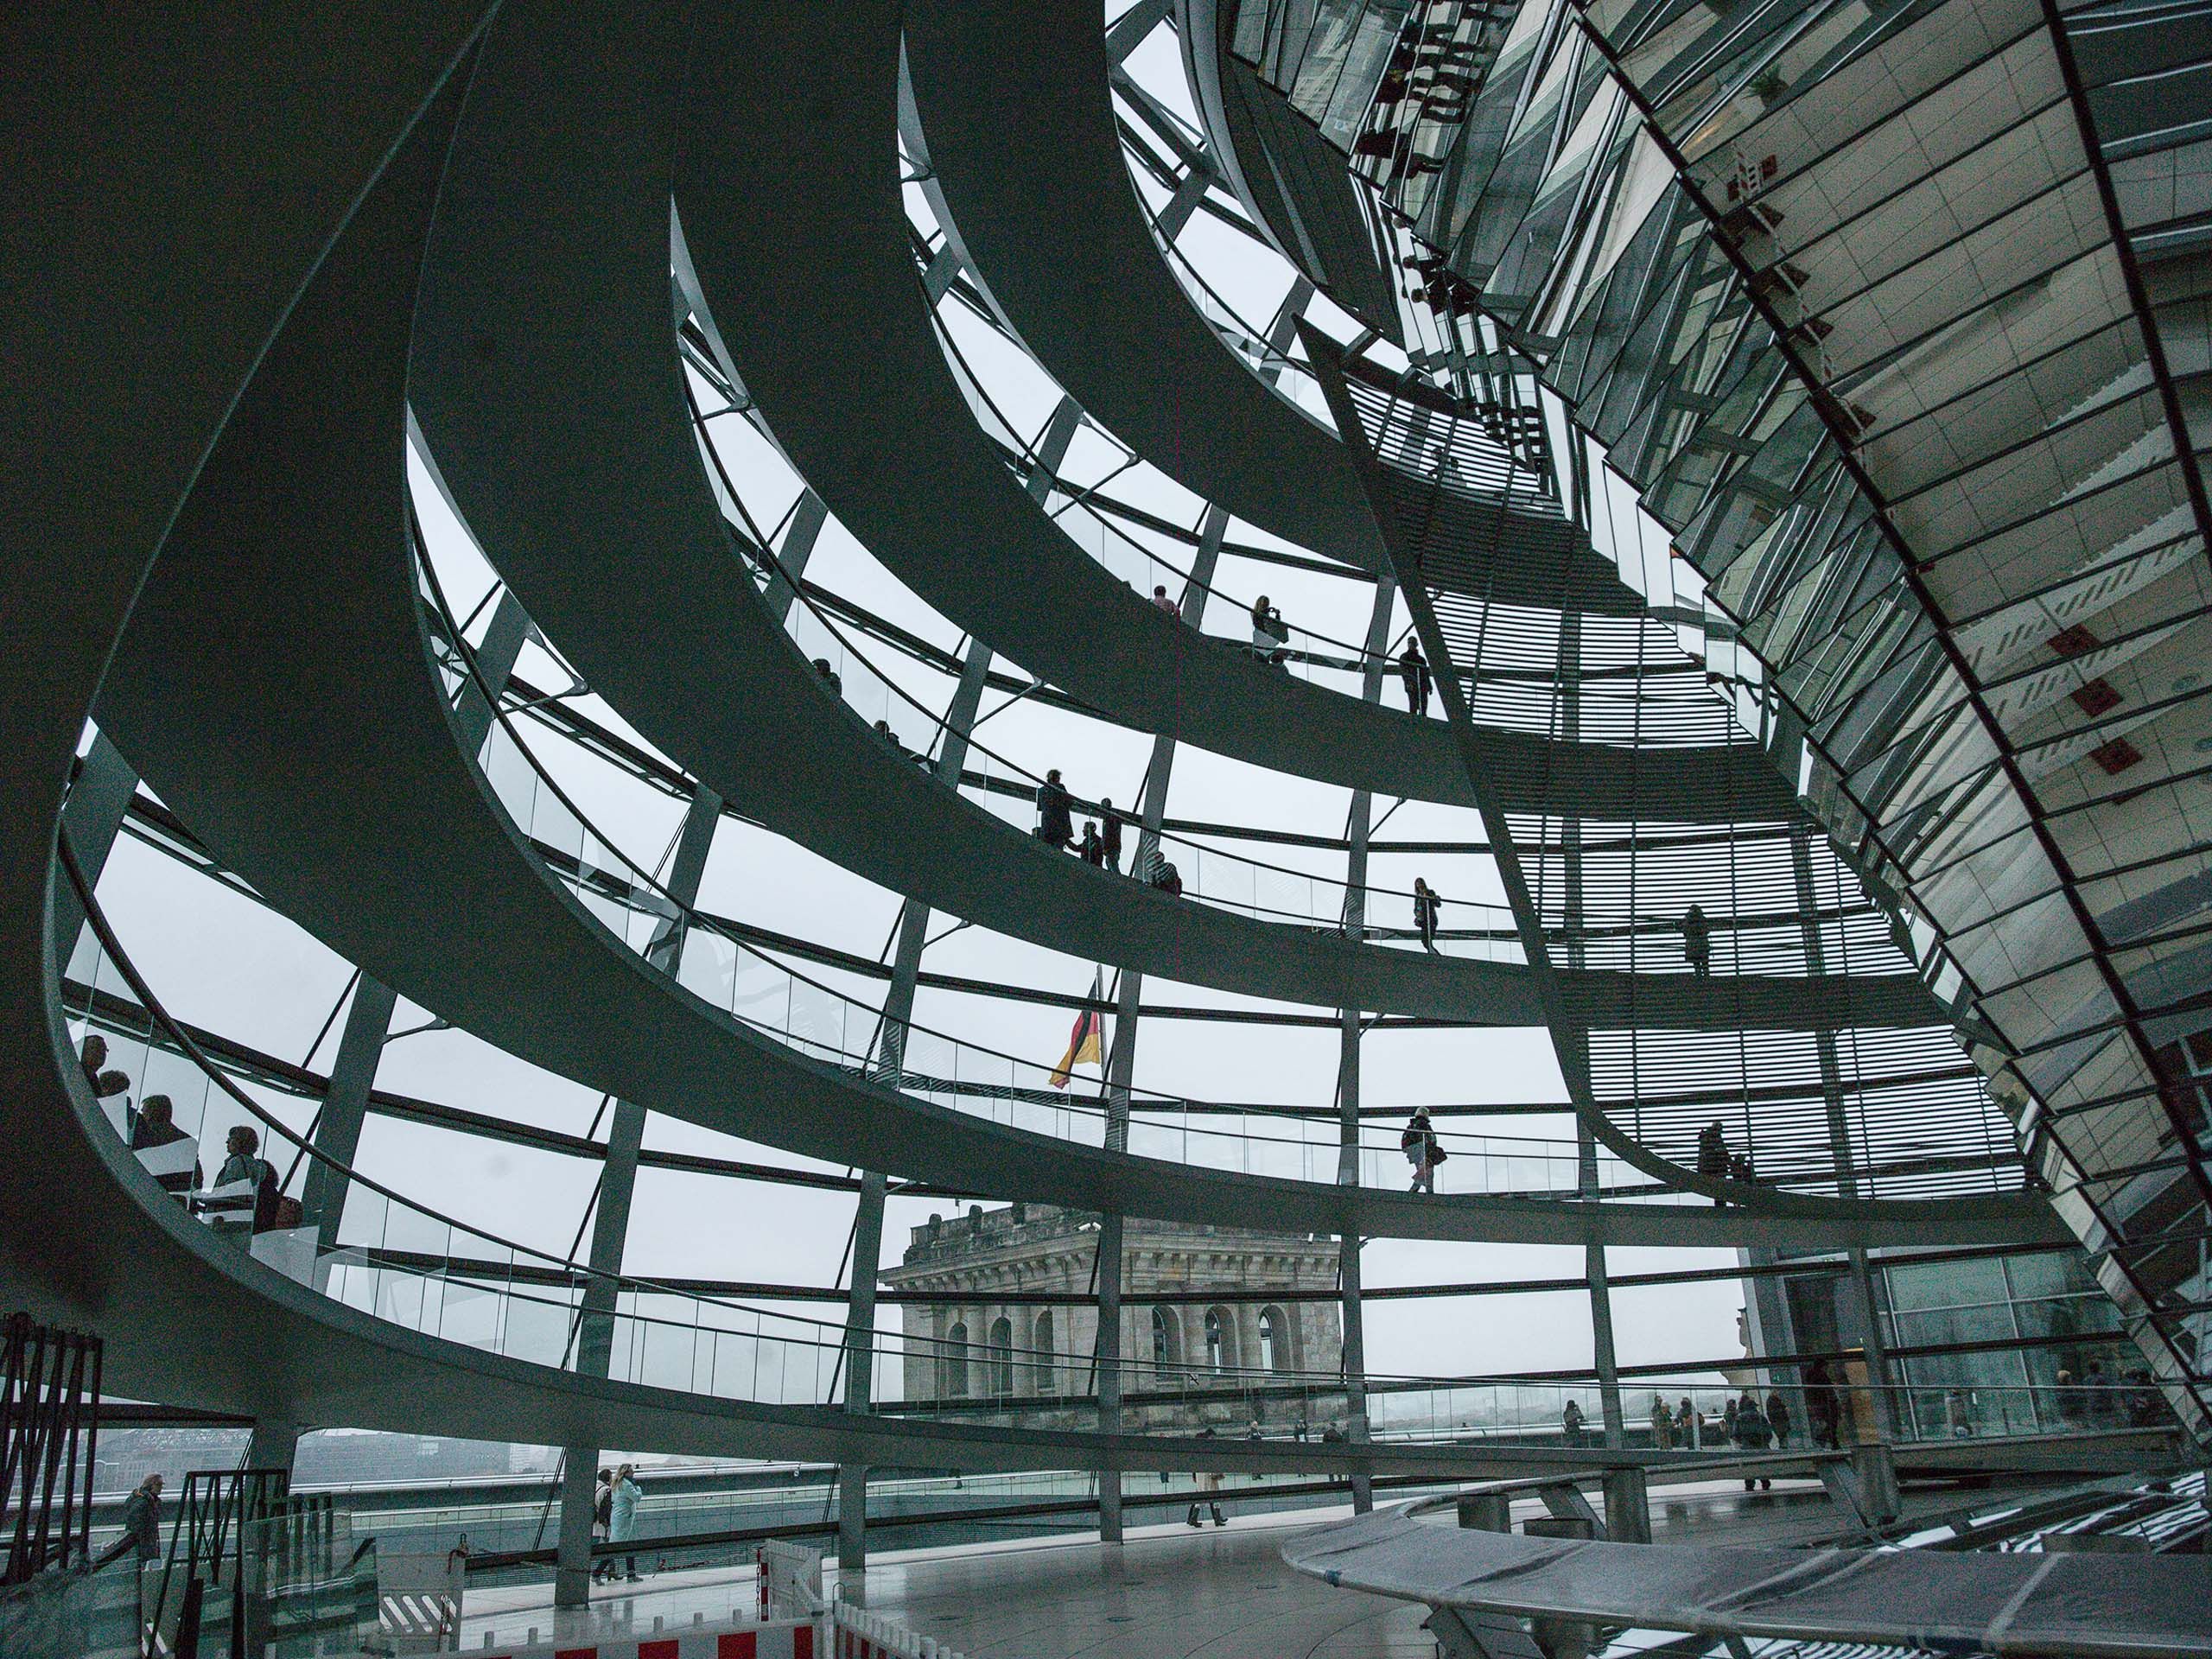 REICHSTAG DOME-NORMAN FOSTER, BERLIN, GERMANY. Study # 2. Image by William Curtis Rolf